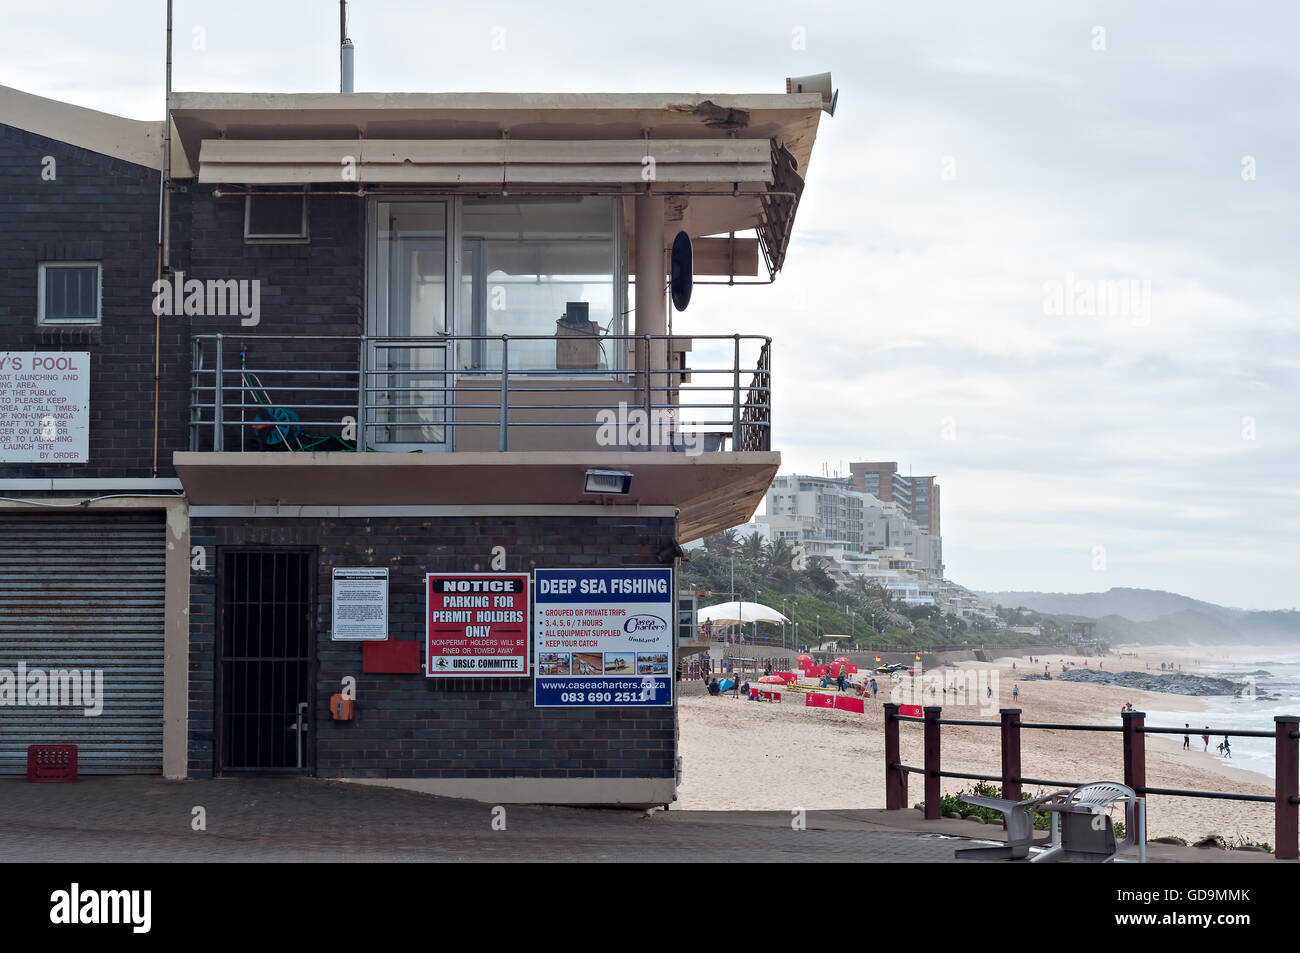 DURBAN, SOUTH AFRICA - JULY 09, 2016: The Grannies Pool lifesaver's station on the Umhlanga Rocks beach Stock Photo